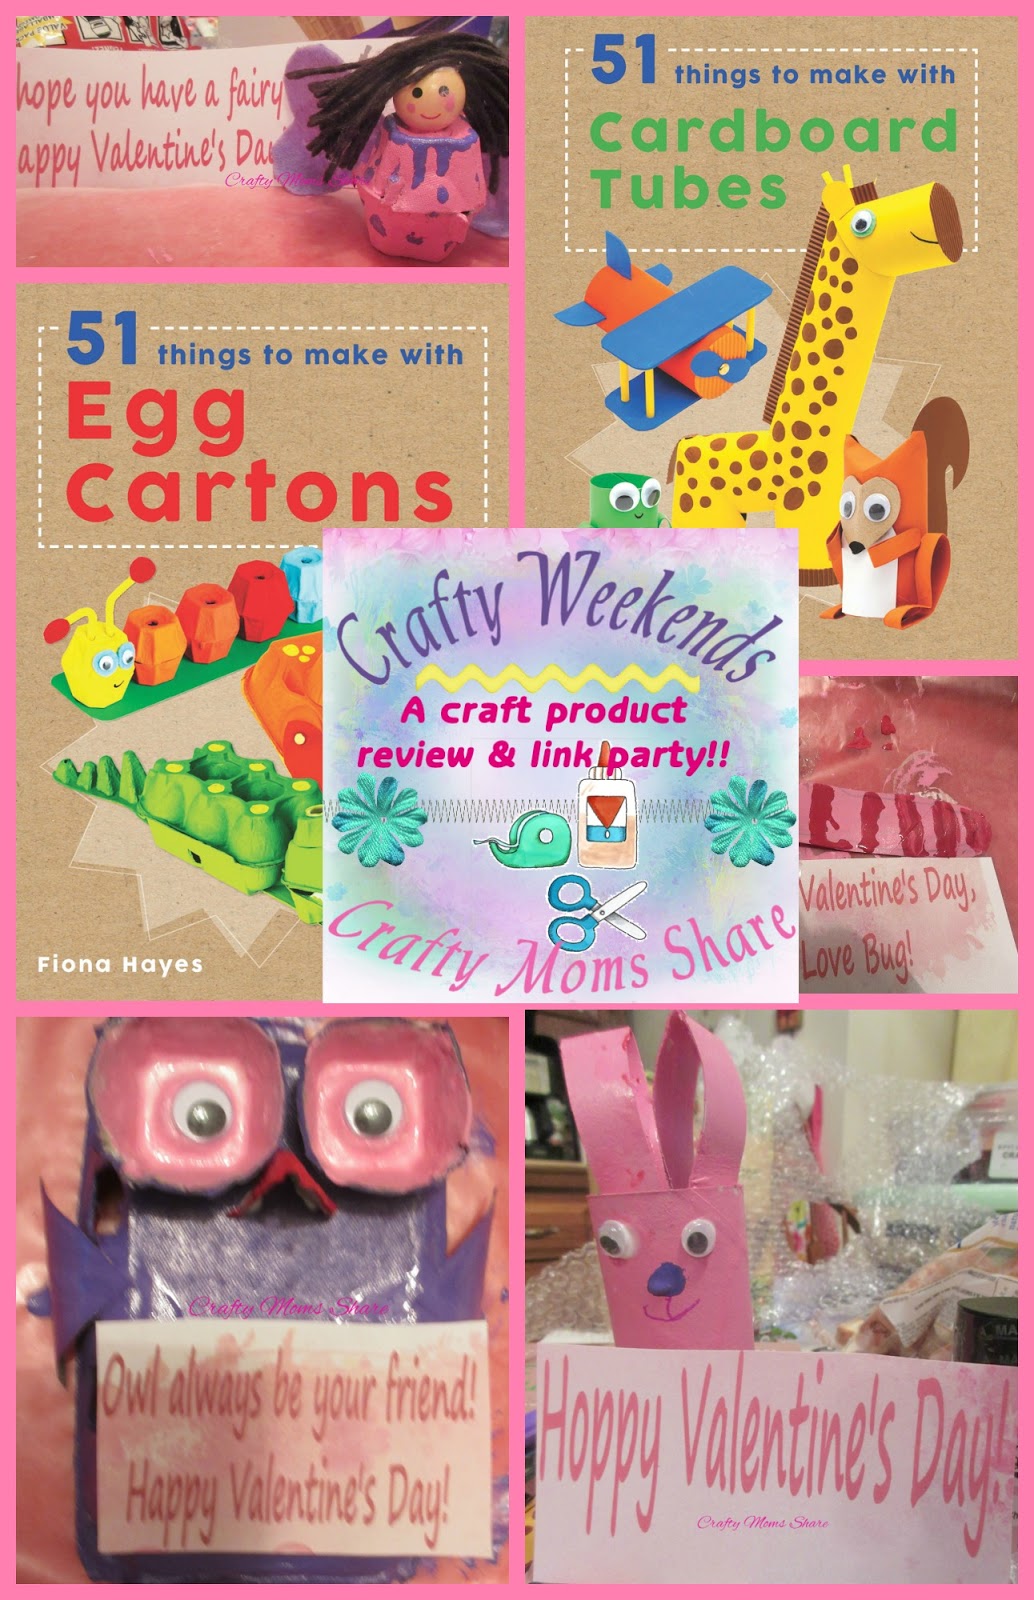 Crafty Moms Share: Crafts from Recycled Materials (Valentine Themed